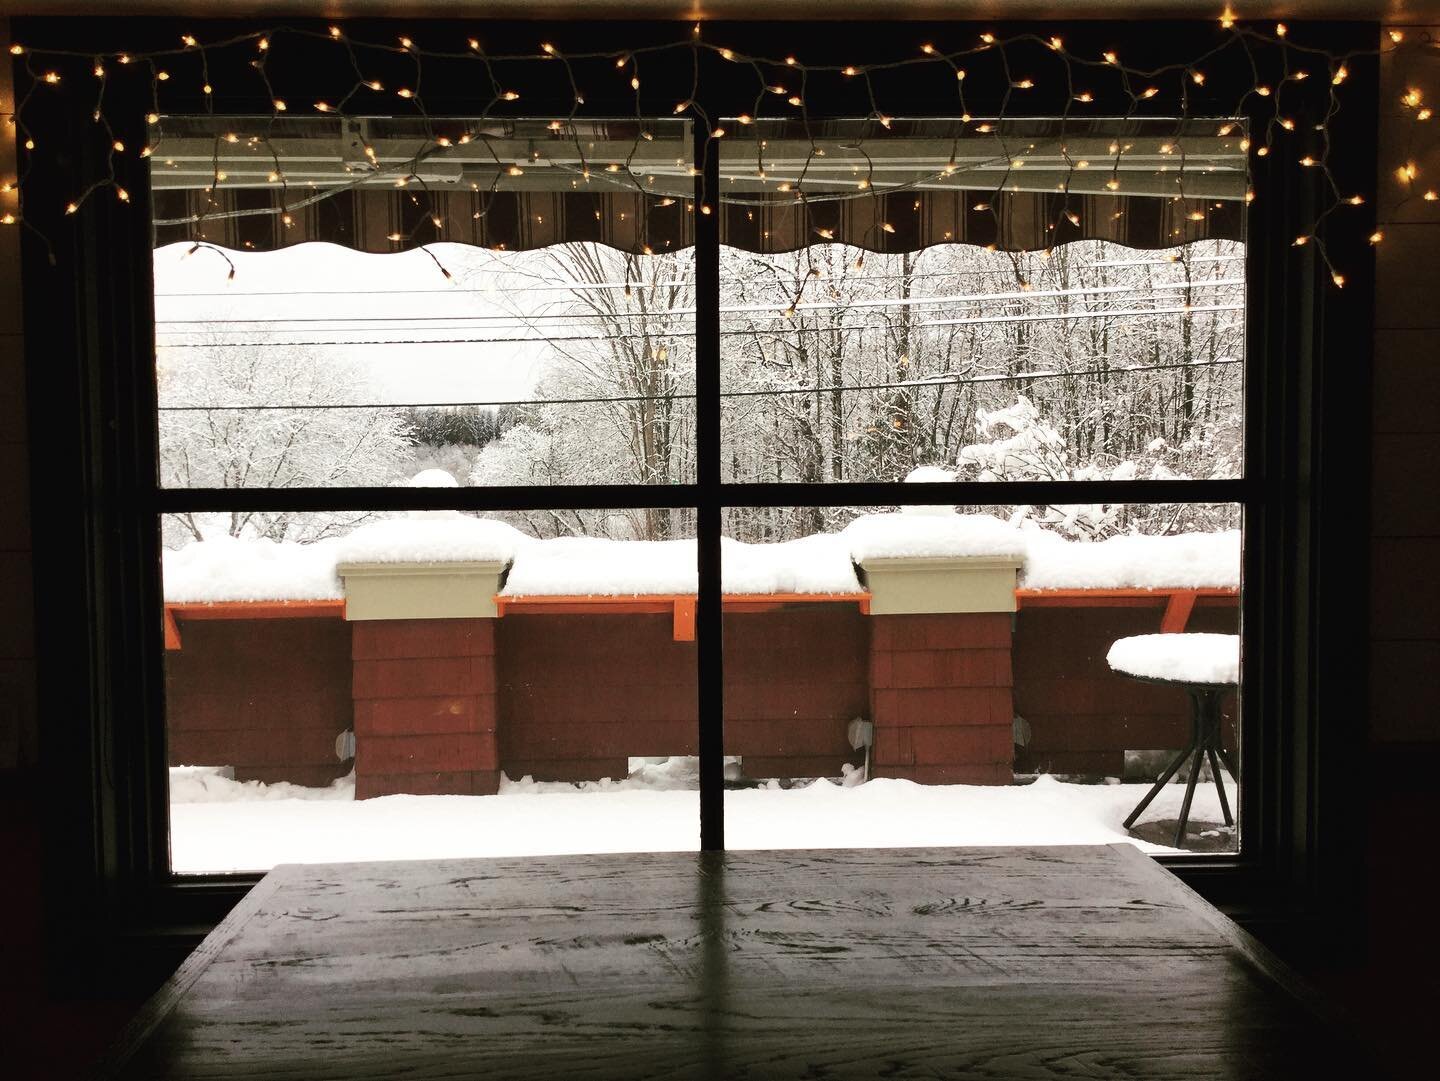 Snow Day Saturday!!❄️☃️ Come warm up at Worthy Kitchen! Serving up some new specials today 😁 Juicy steak frites, Bone-in chicken buckets, succulent oysters &amp; stuffed clams! Dine in or takeout available from 11:30-8.